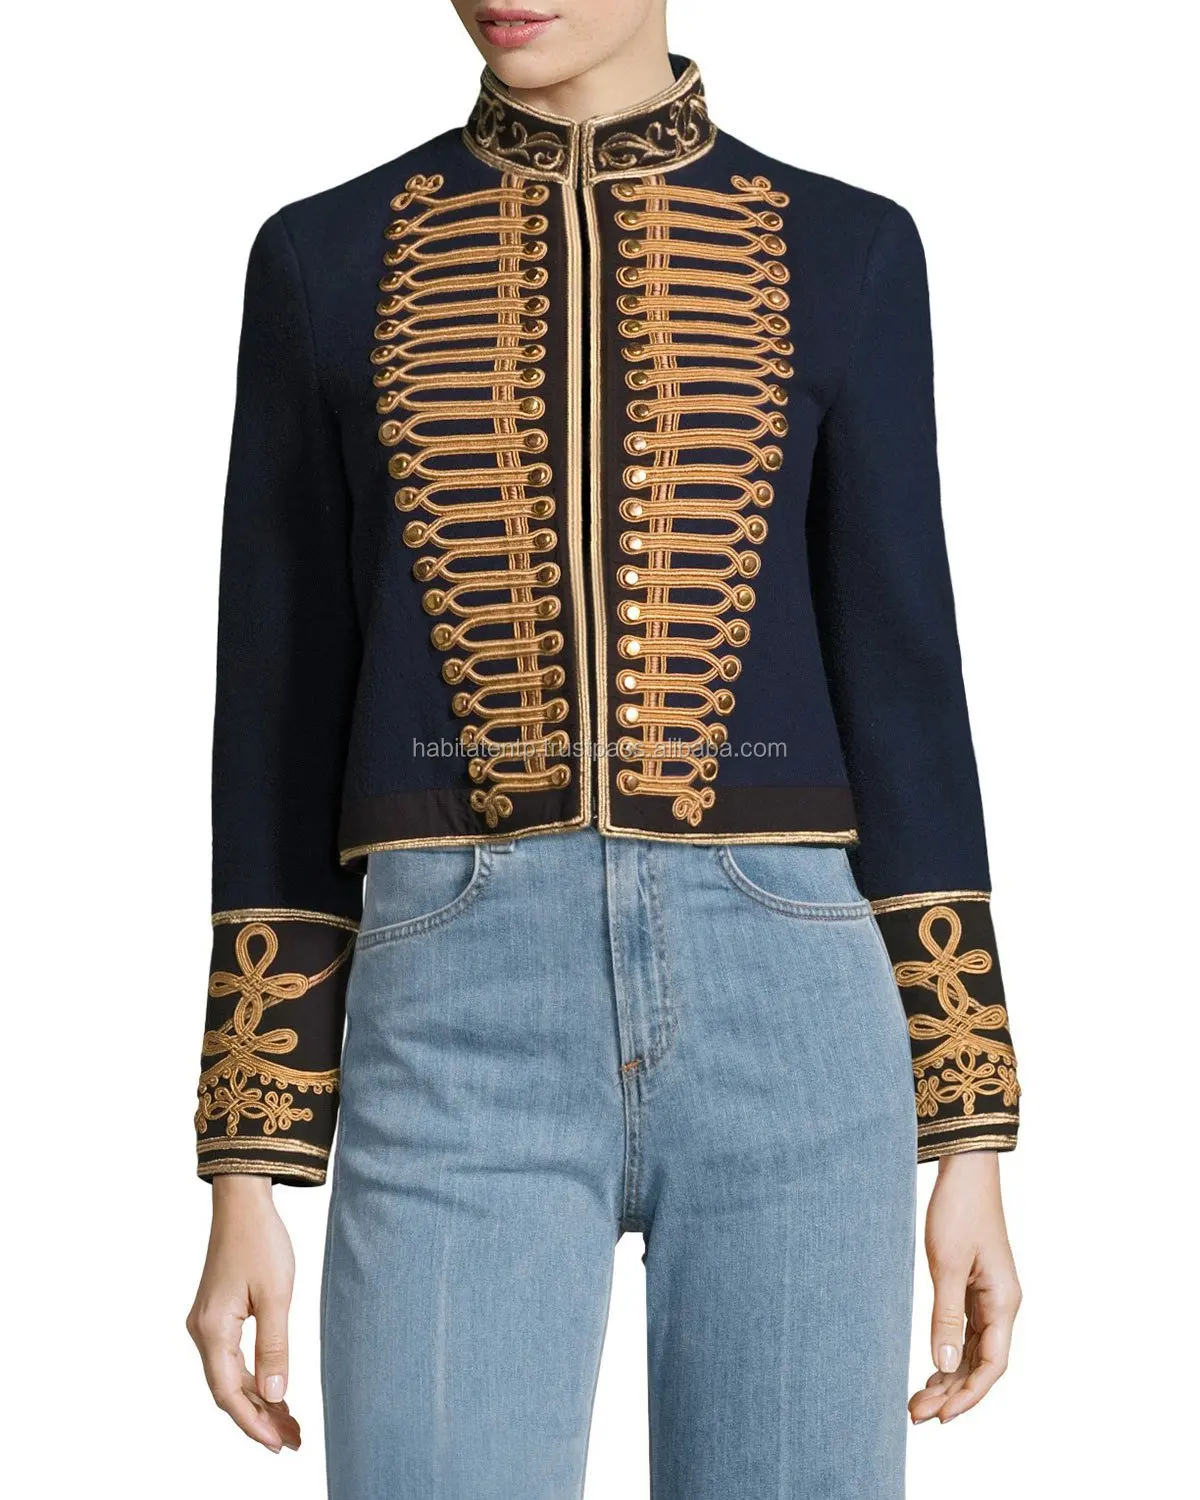 Hussars Women Jacket Reproduction Supplier Manufacture Brand New Custom ...